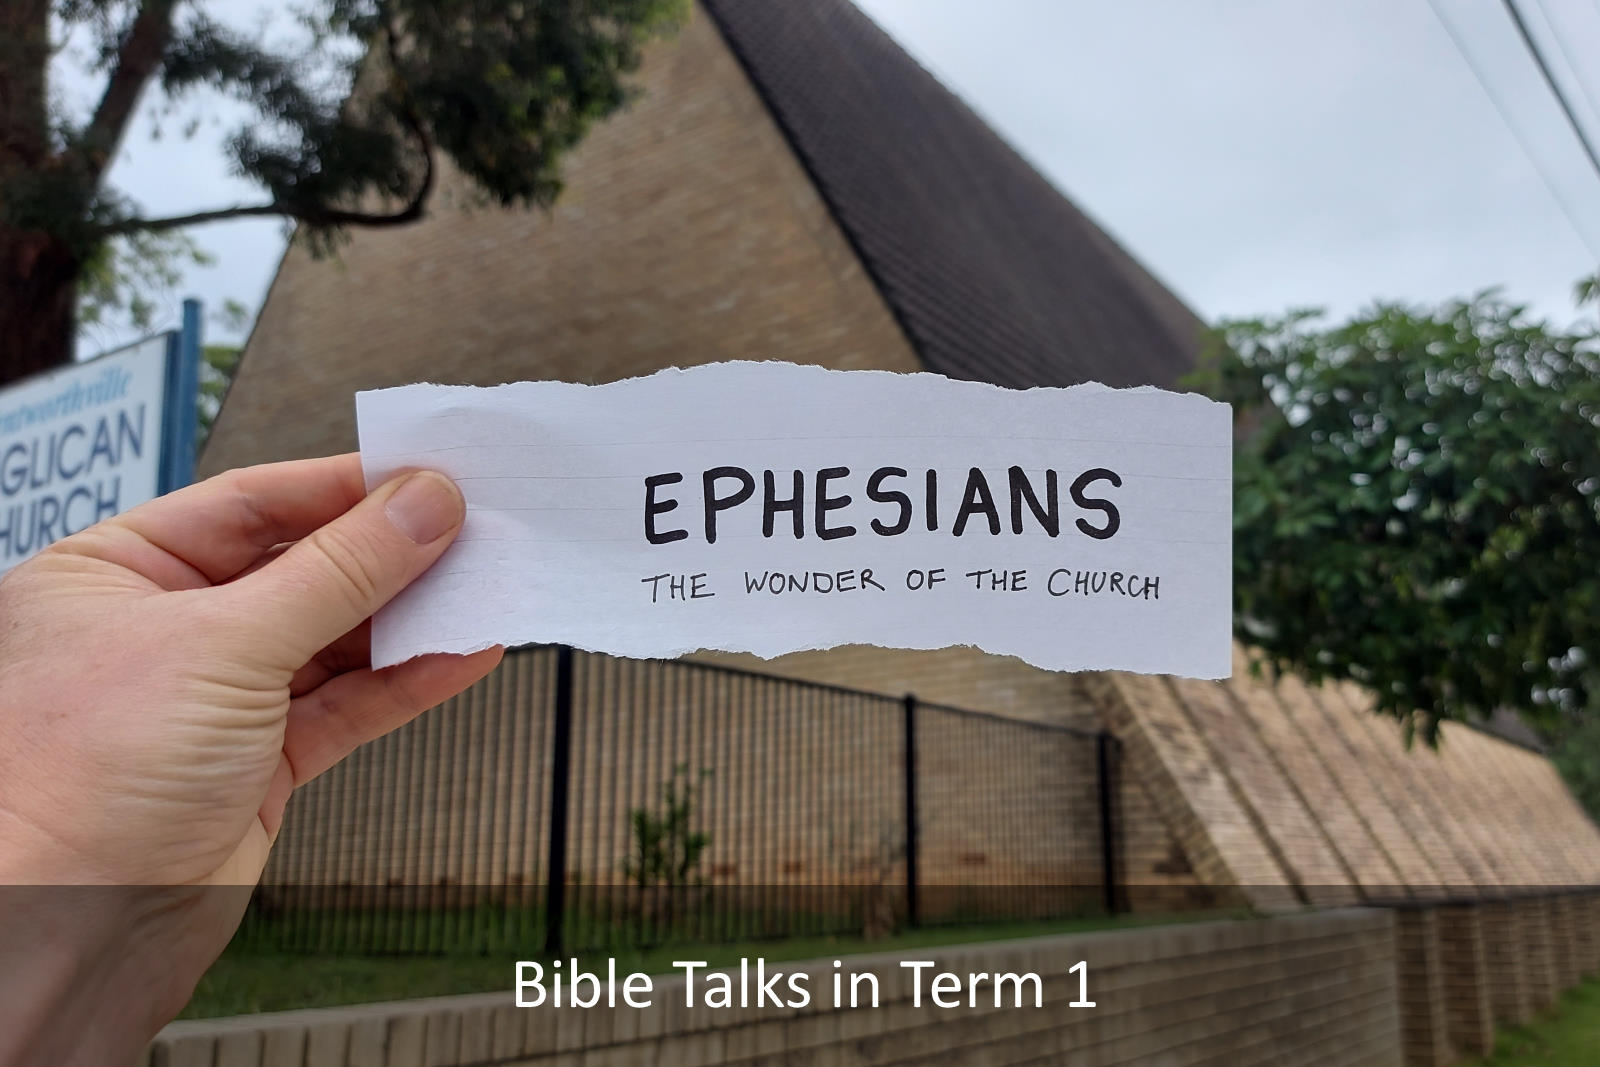 Ephesians. The Wonder of the Church. Bible Talks in Term 1.